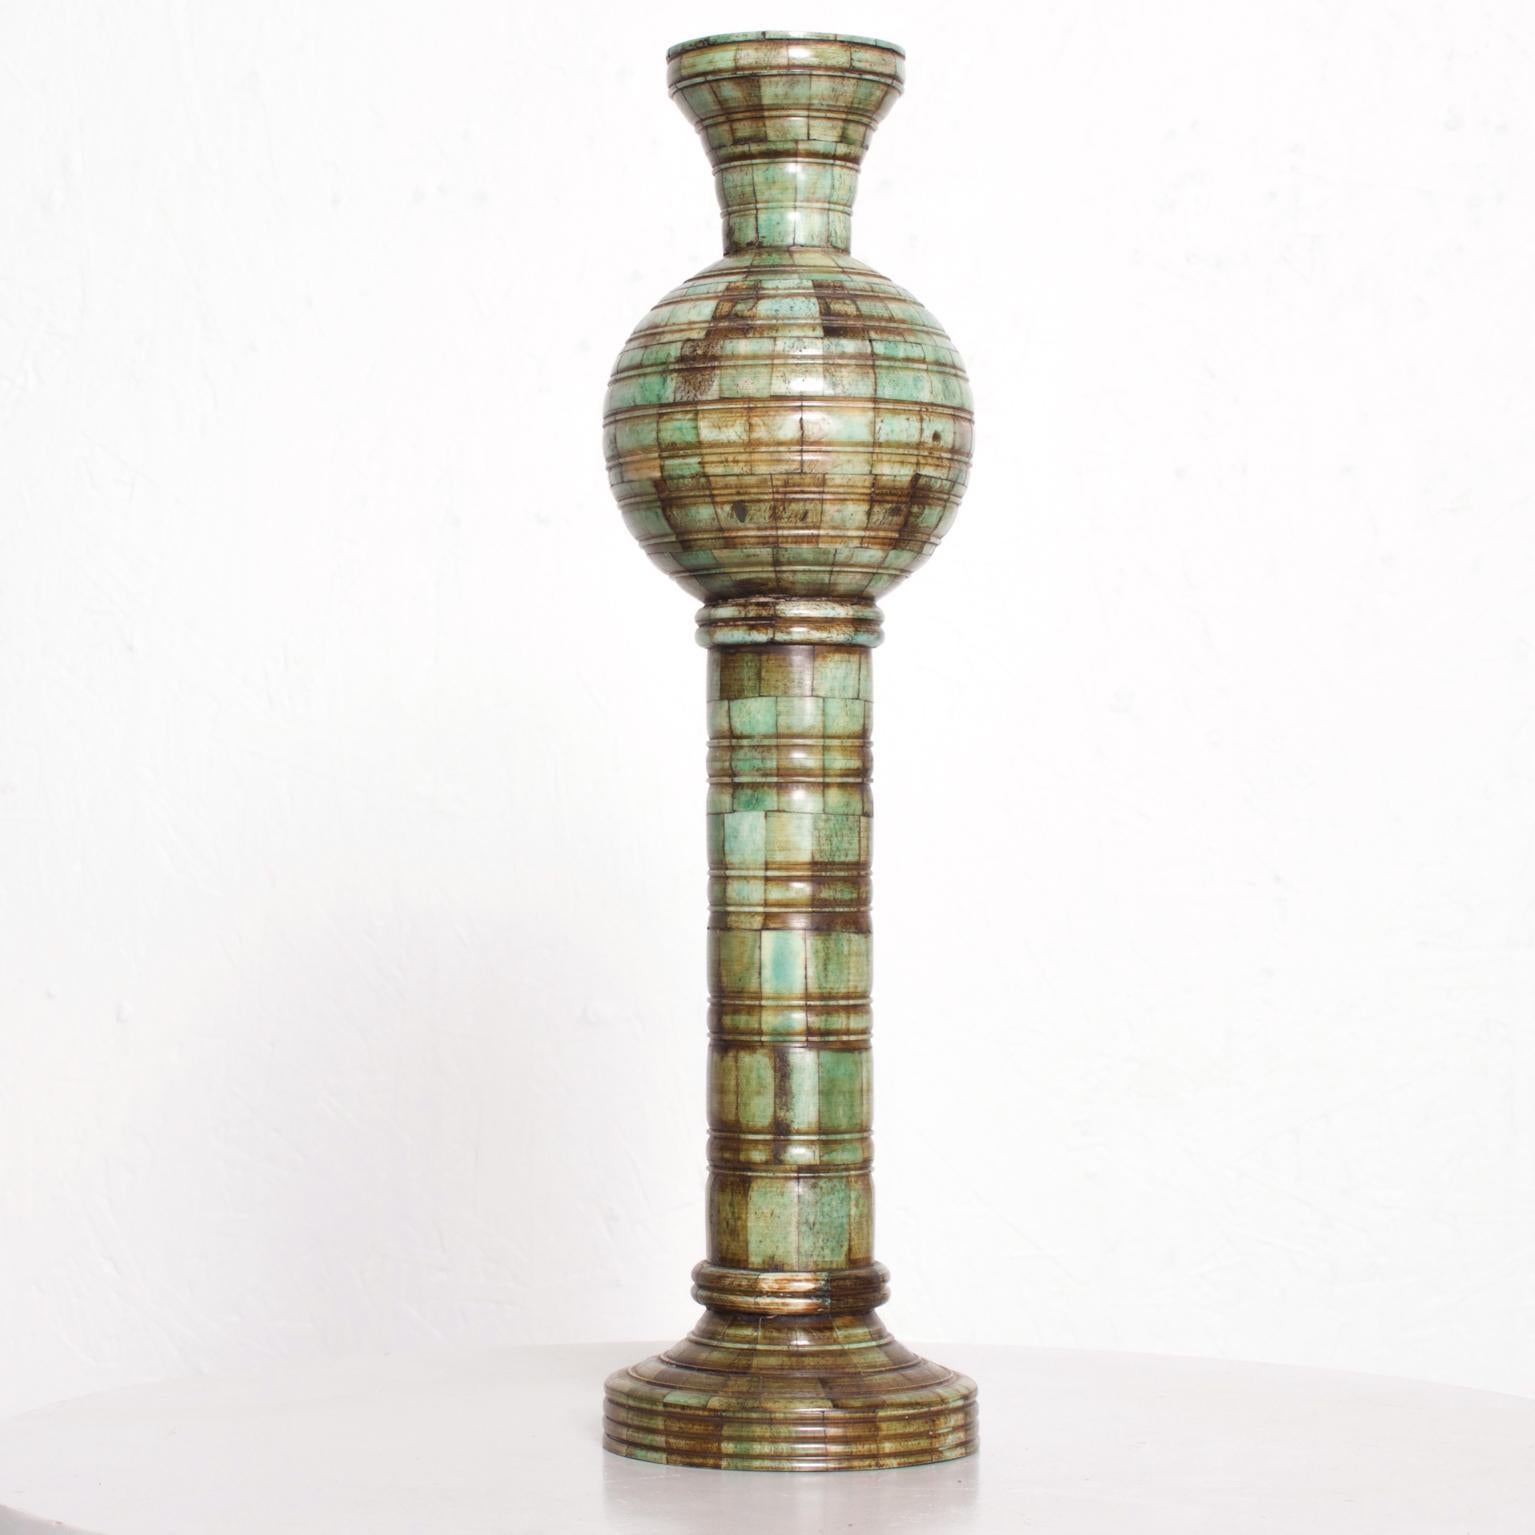 We are pleased to offer for your consideration a vintage-modern tessellated candlestick or candleholder. Unmarked. No information present on the maker or place of production. Dimensions: 15